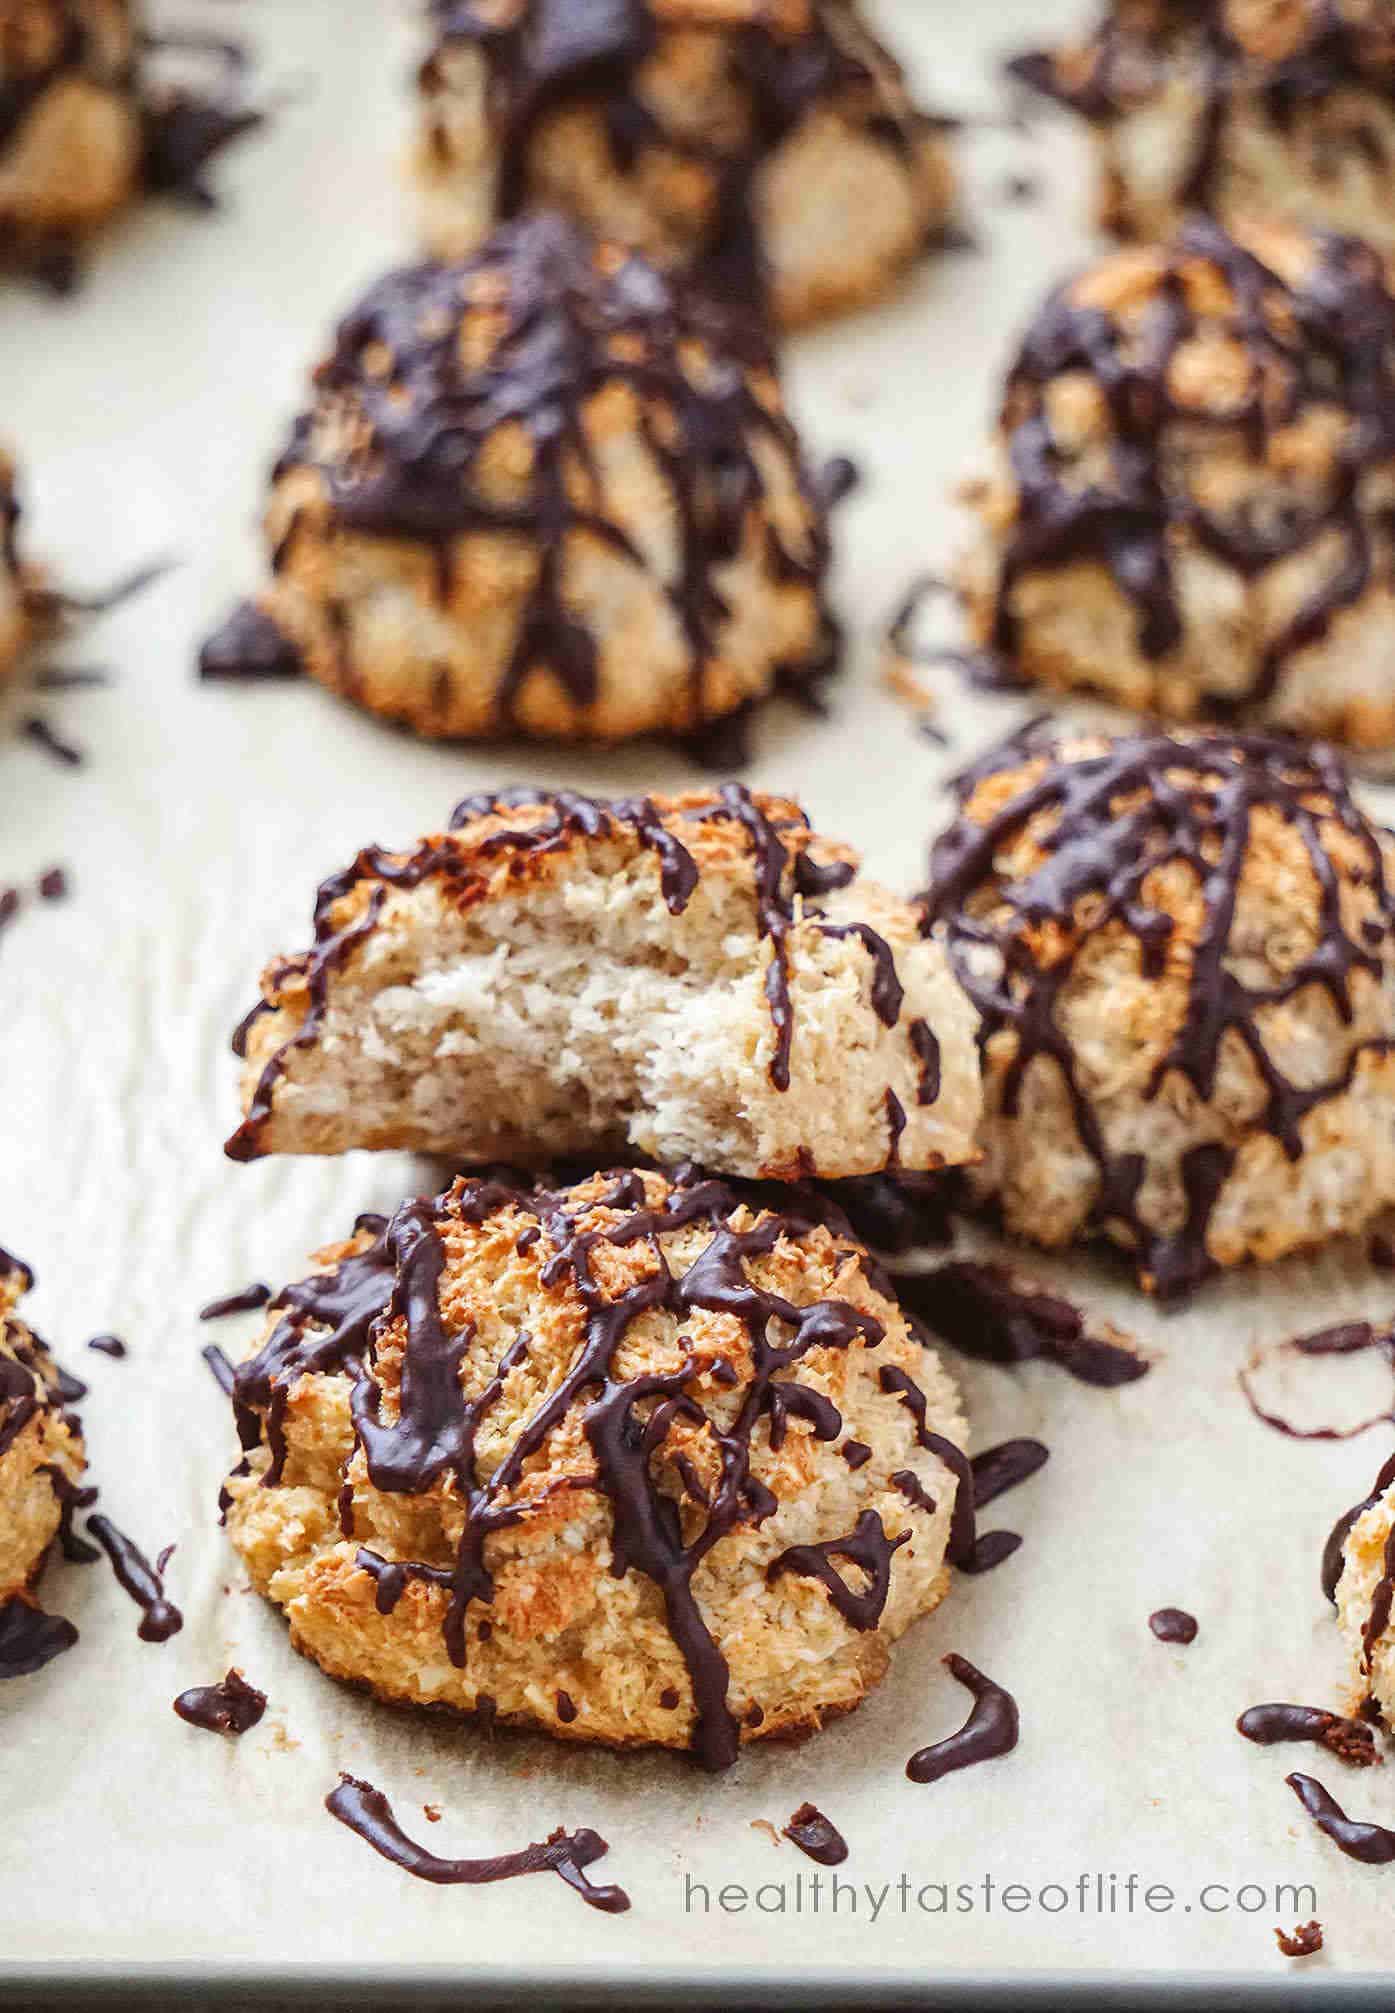 The best gluten free coconut macaroons recipe made with egg whites and without condensed milk.